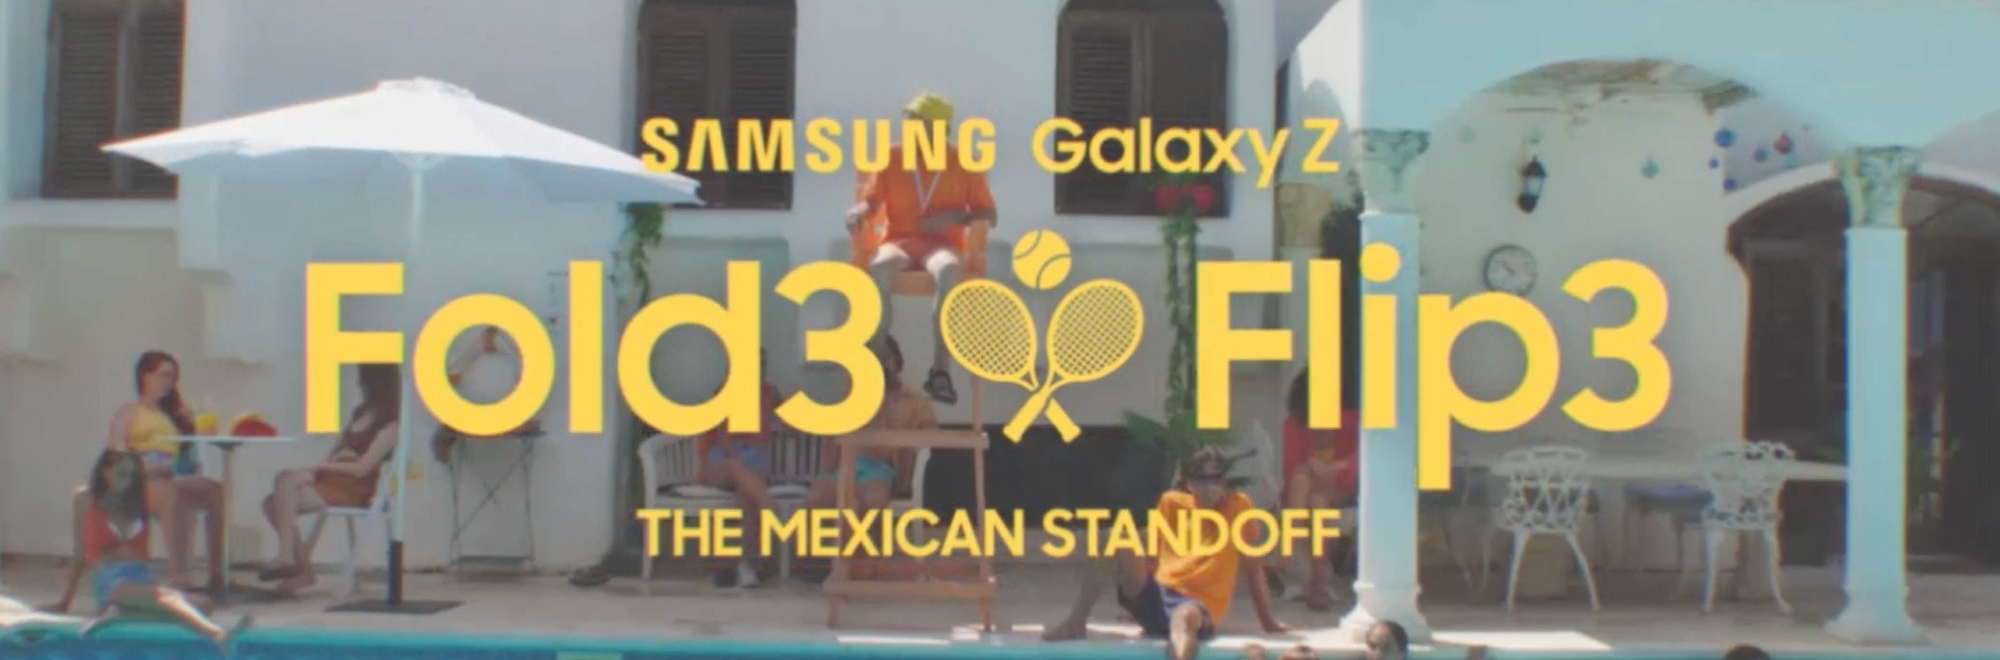 Two new Samsung phones battle it out with a Mexican standoff by Leo Burnett Israel